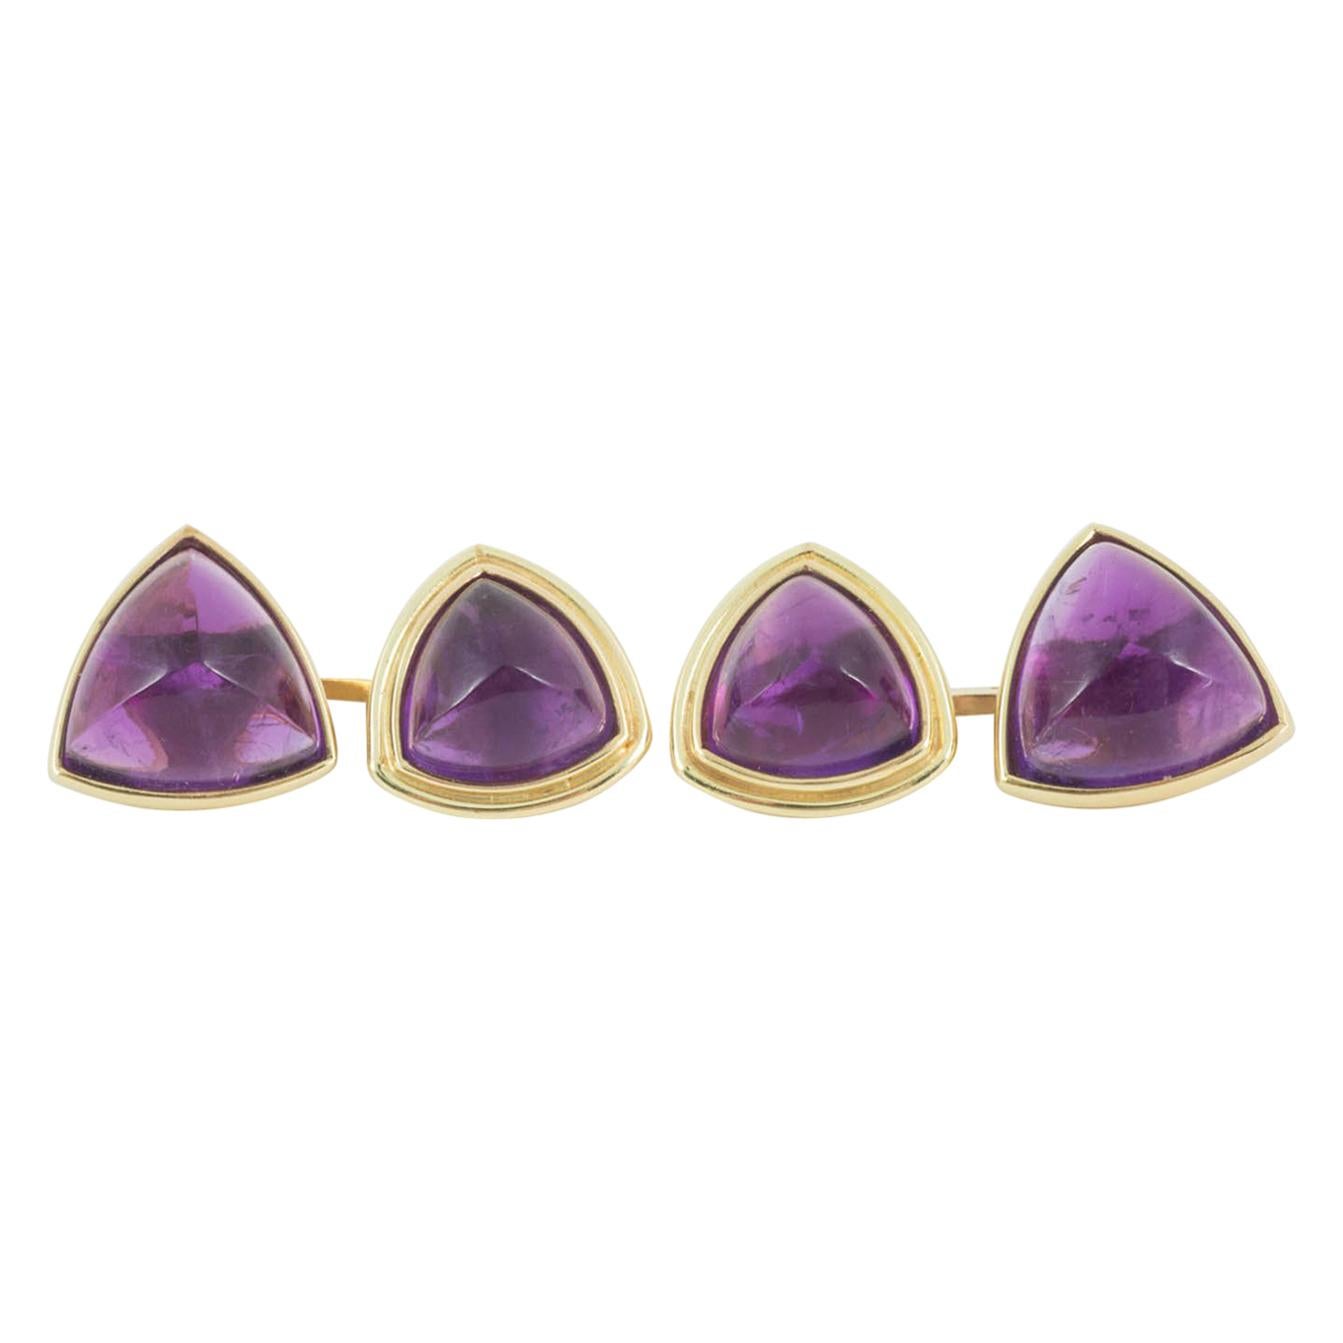 Cufflinks with Triangular Mounted Amethysts in 18 Karat Gold, French circa 1920 For Sale